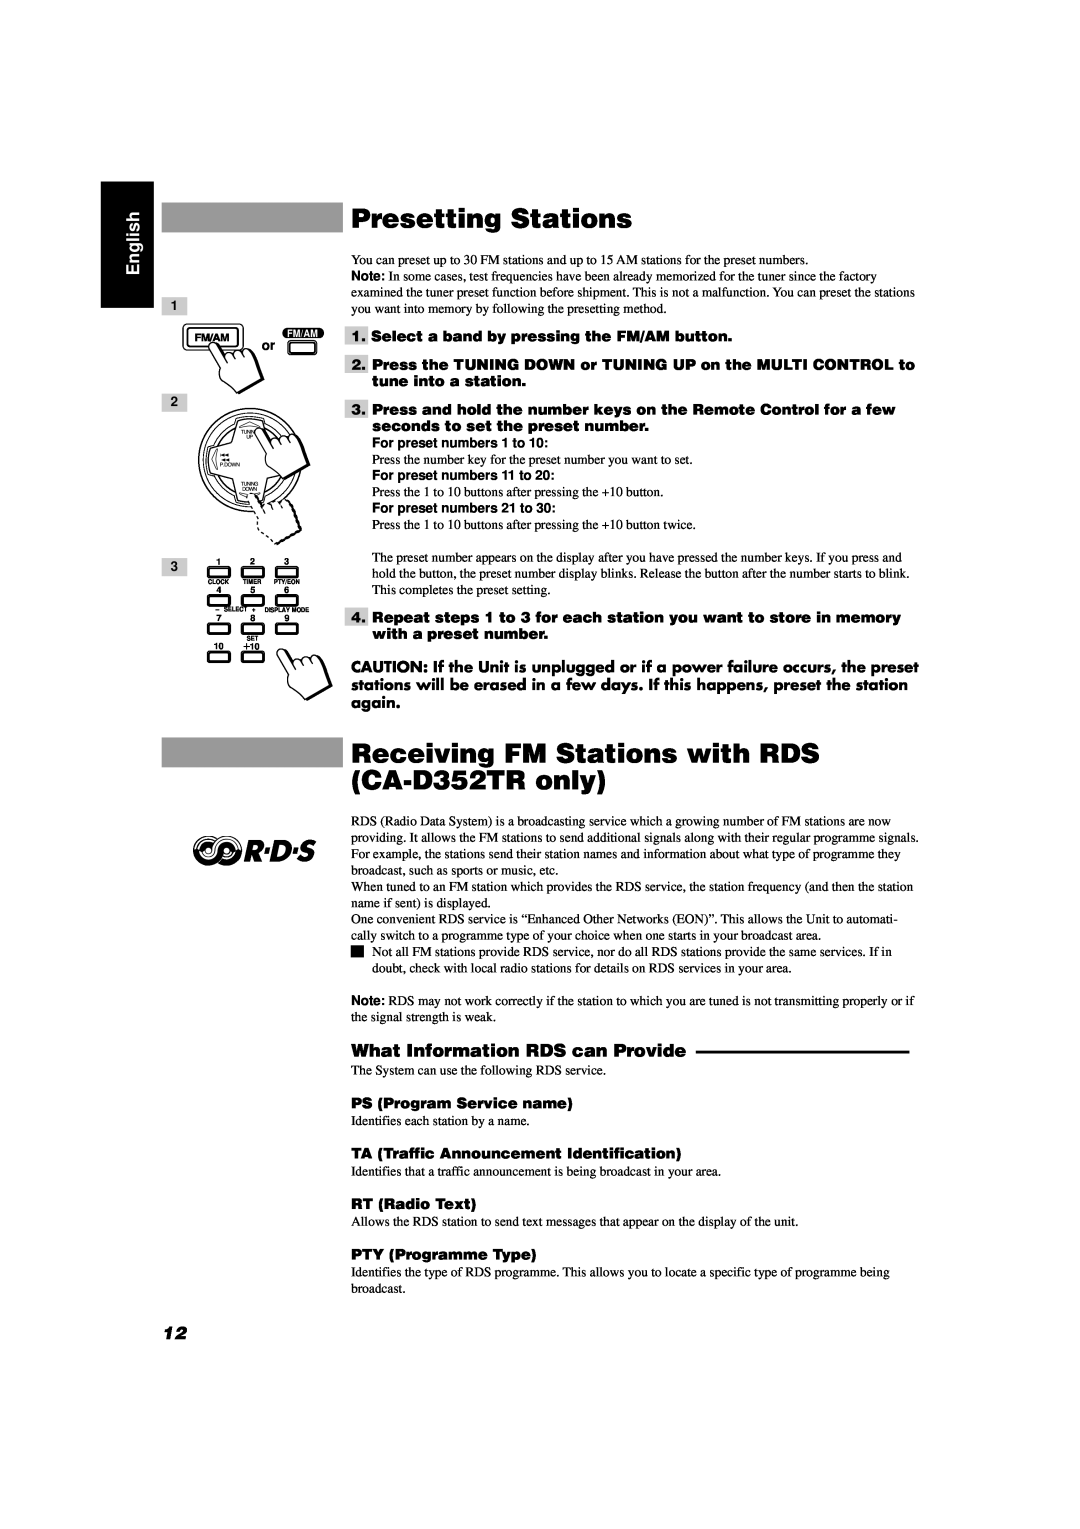 JVC manual Presetting Stations, Receiving FM Stations with RDS CA-D352TRonly, What Information RDS can Provide, English 